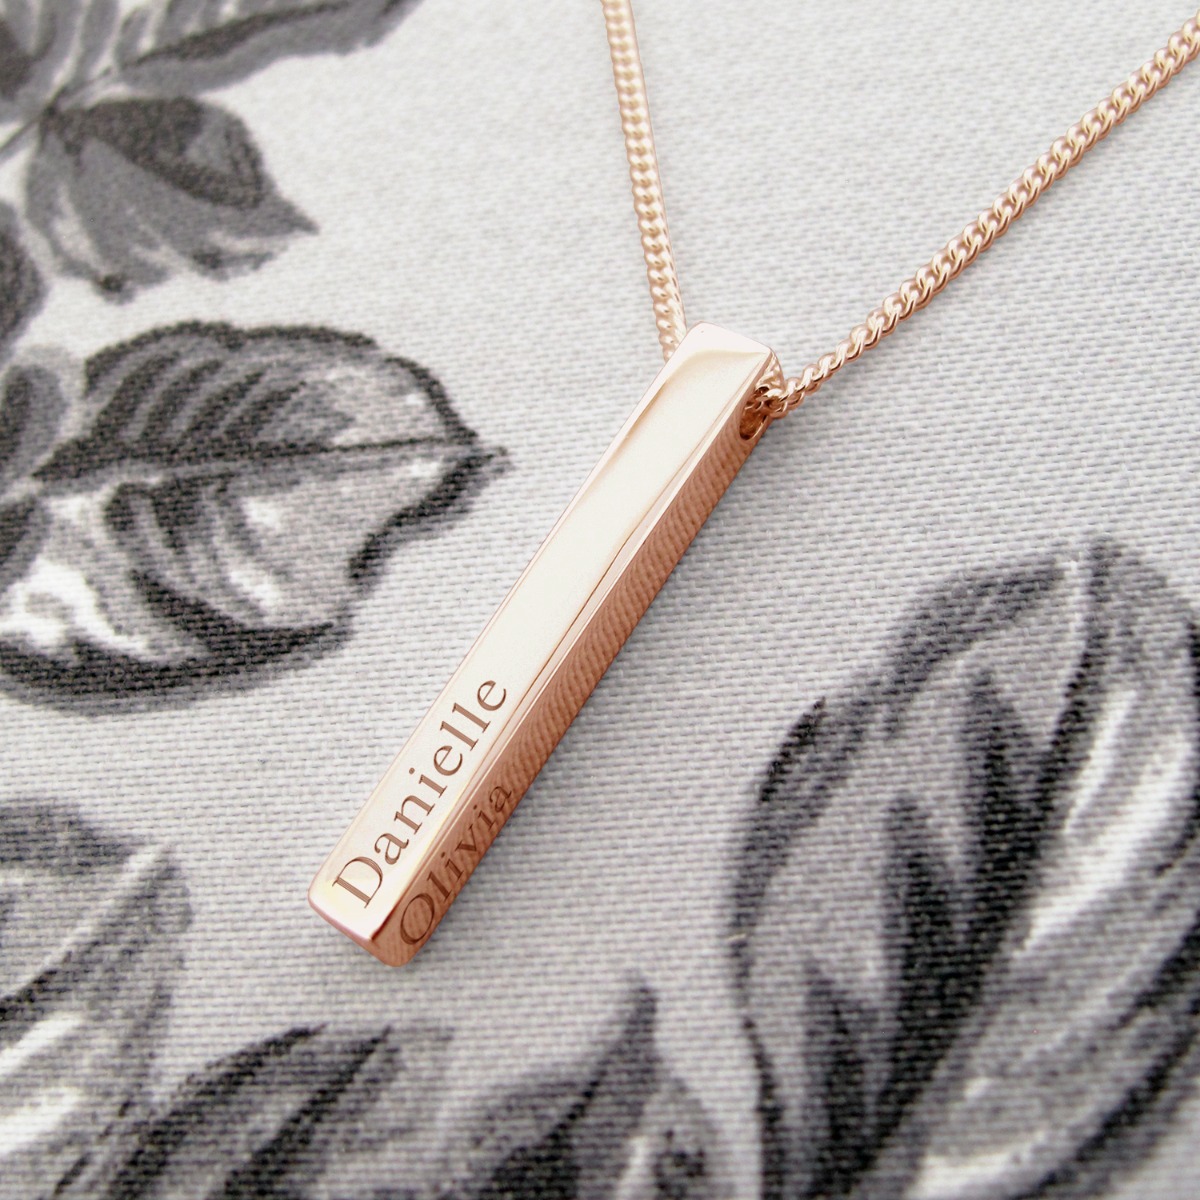 9ct Rose Gold Plated 3D Engraved Name Bar Pendant With Chain